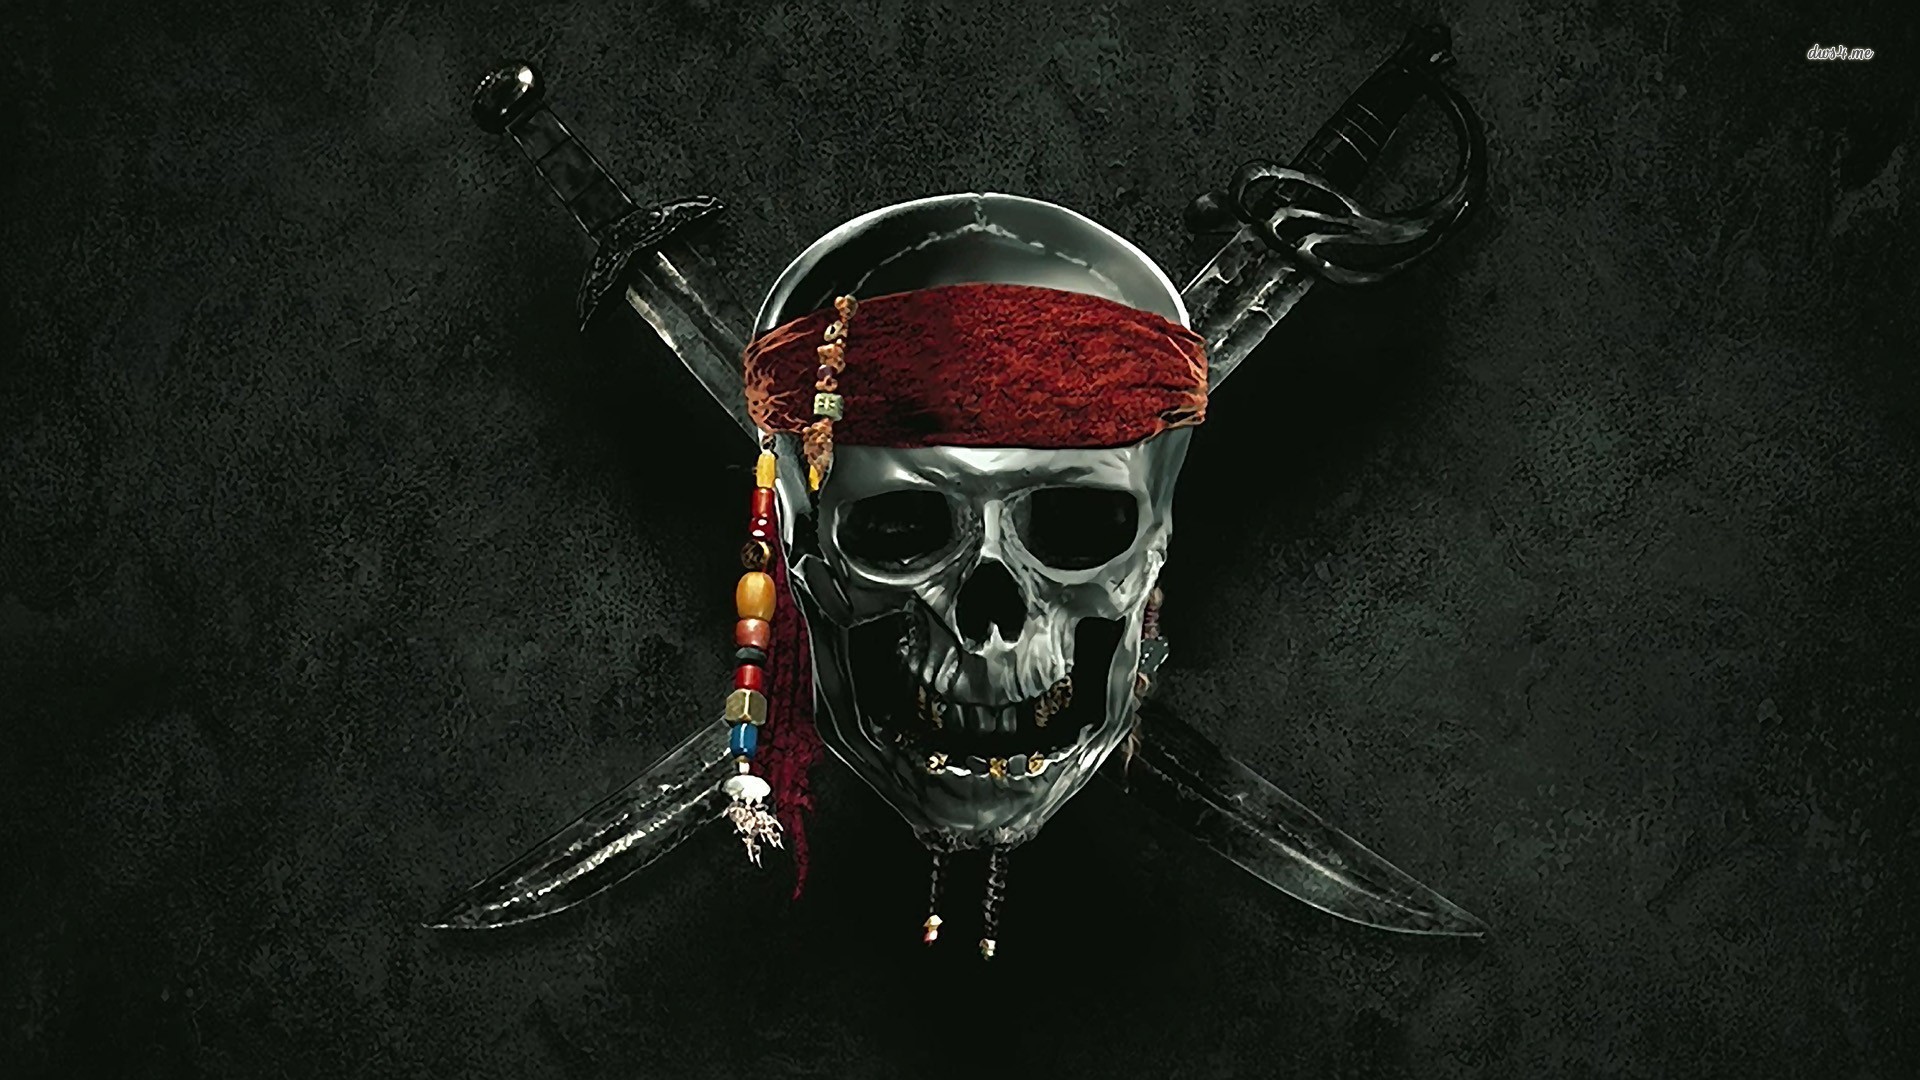  Download Pirates Of The Caribbean Movie Wallpaper by tiffanymason 